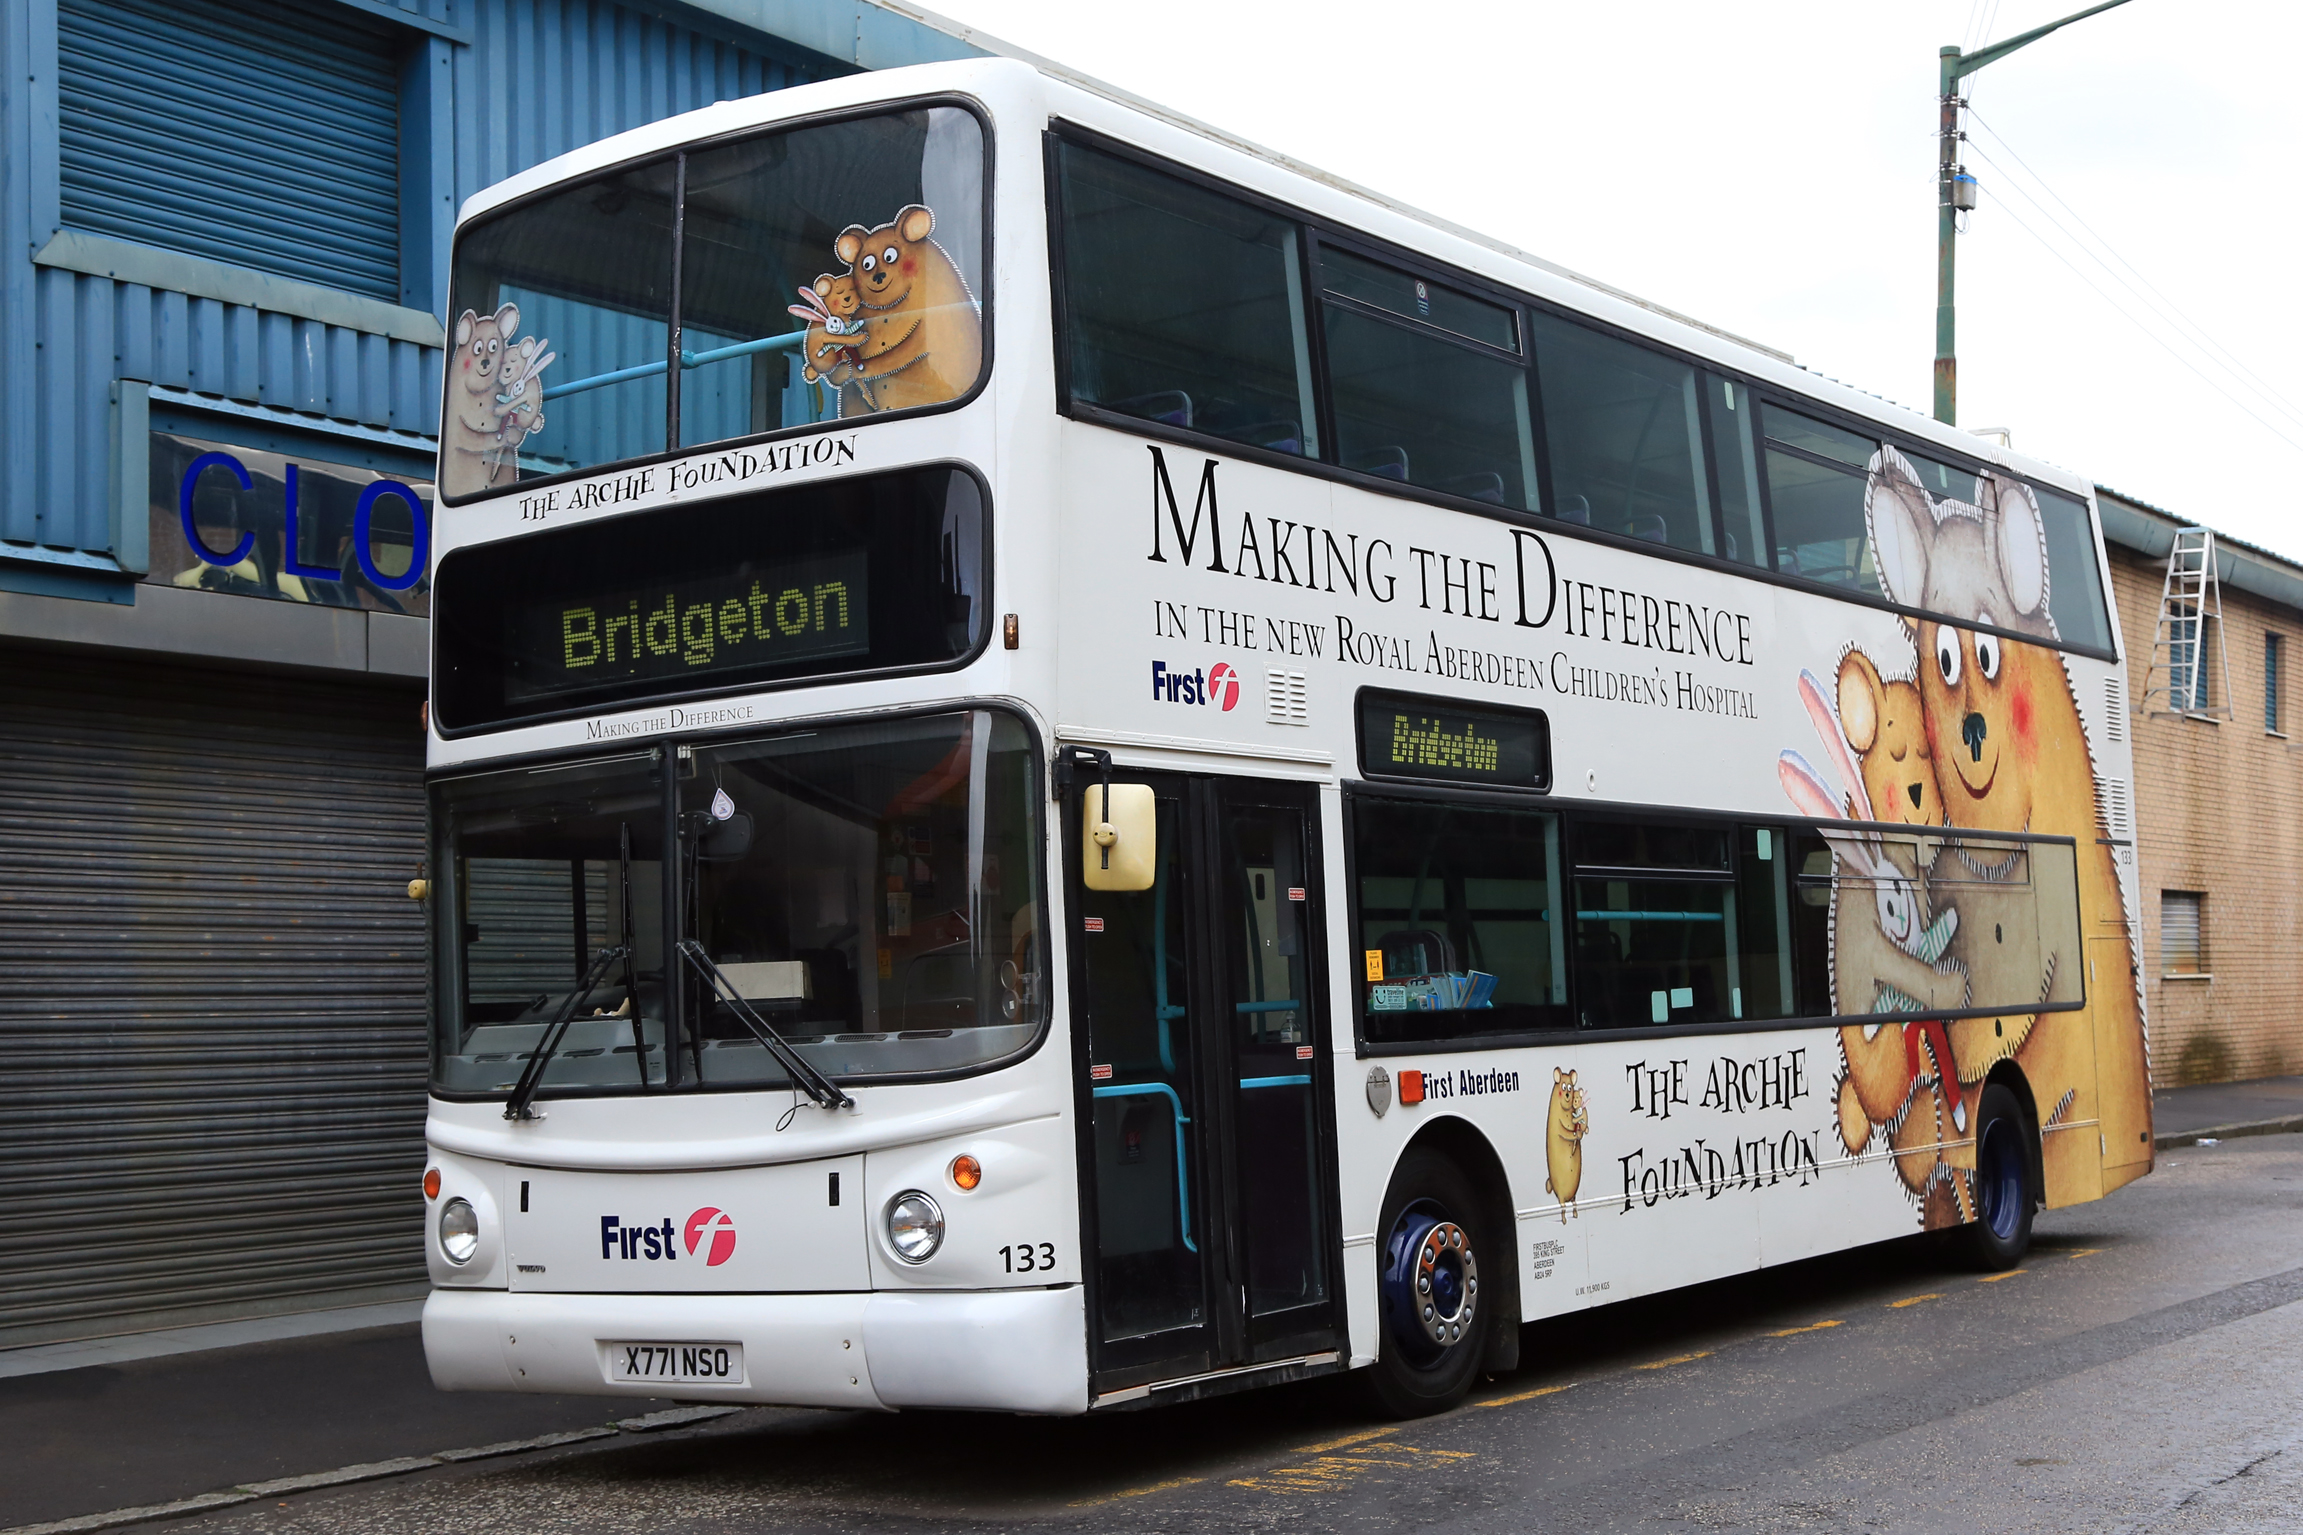 Now in preservation, this early low floor double-decker, a 2000 Alexander ALX400 bodied Volvo B7TL spent most of its operating life with First in Aberdeen carrying this promotional branding for The Archie Foundation